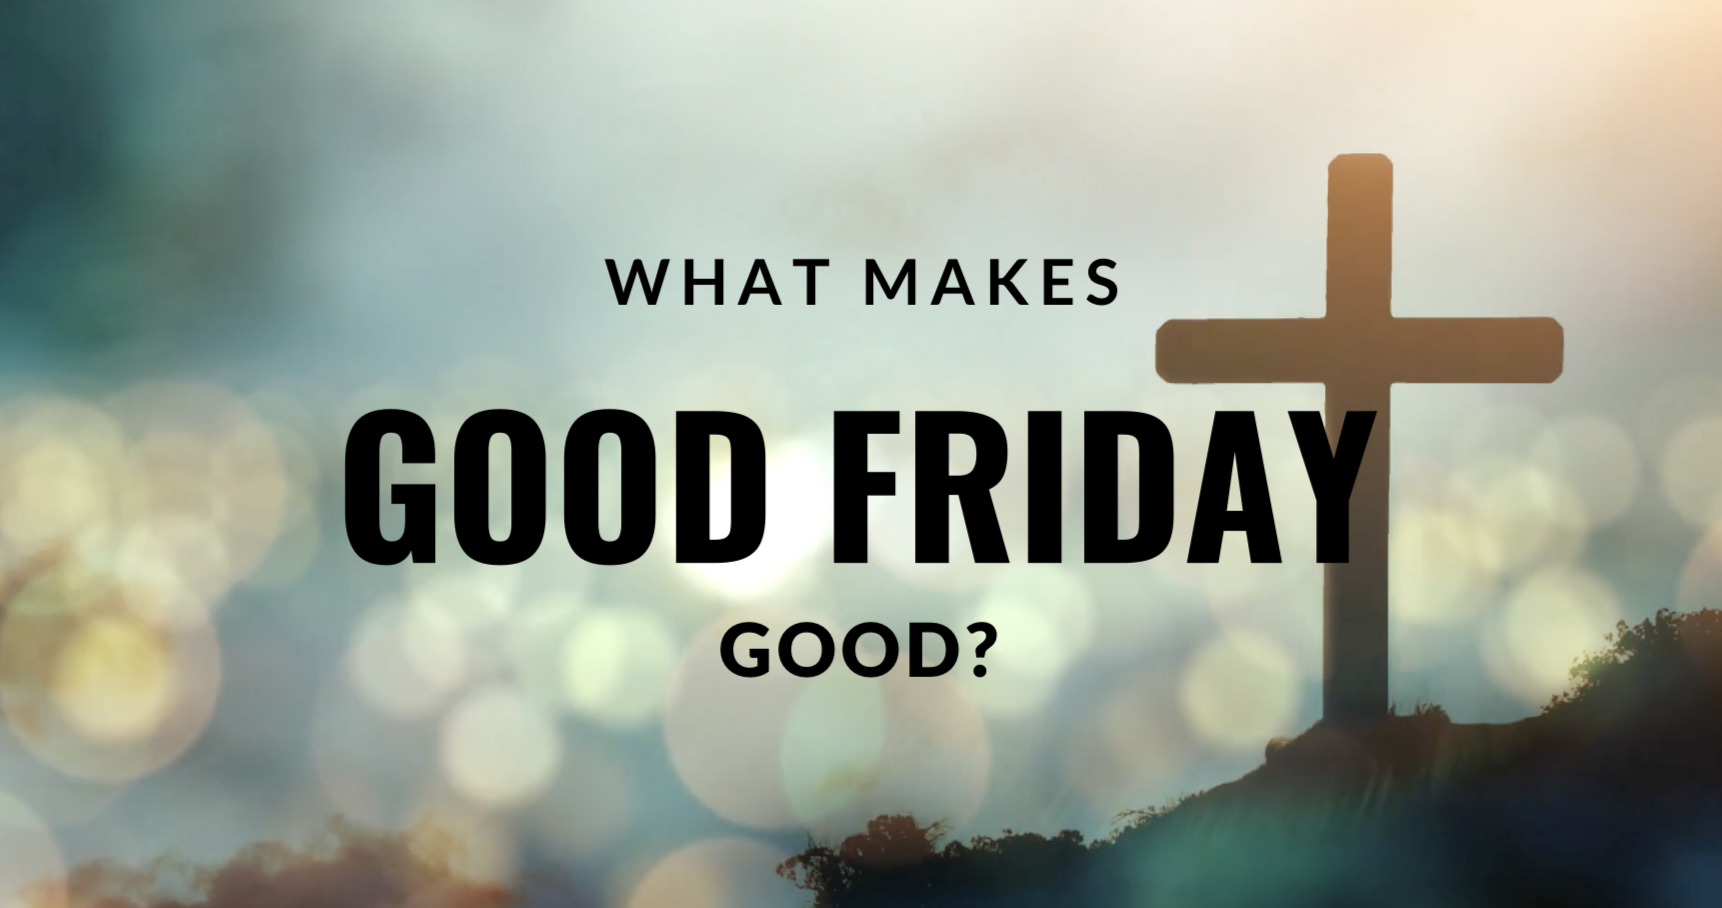 What Makes Good Friday “Good”?